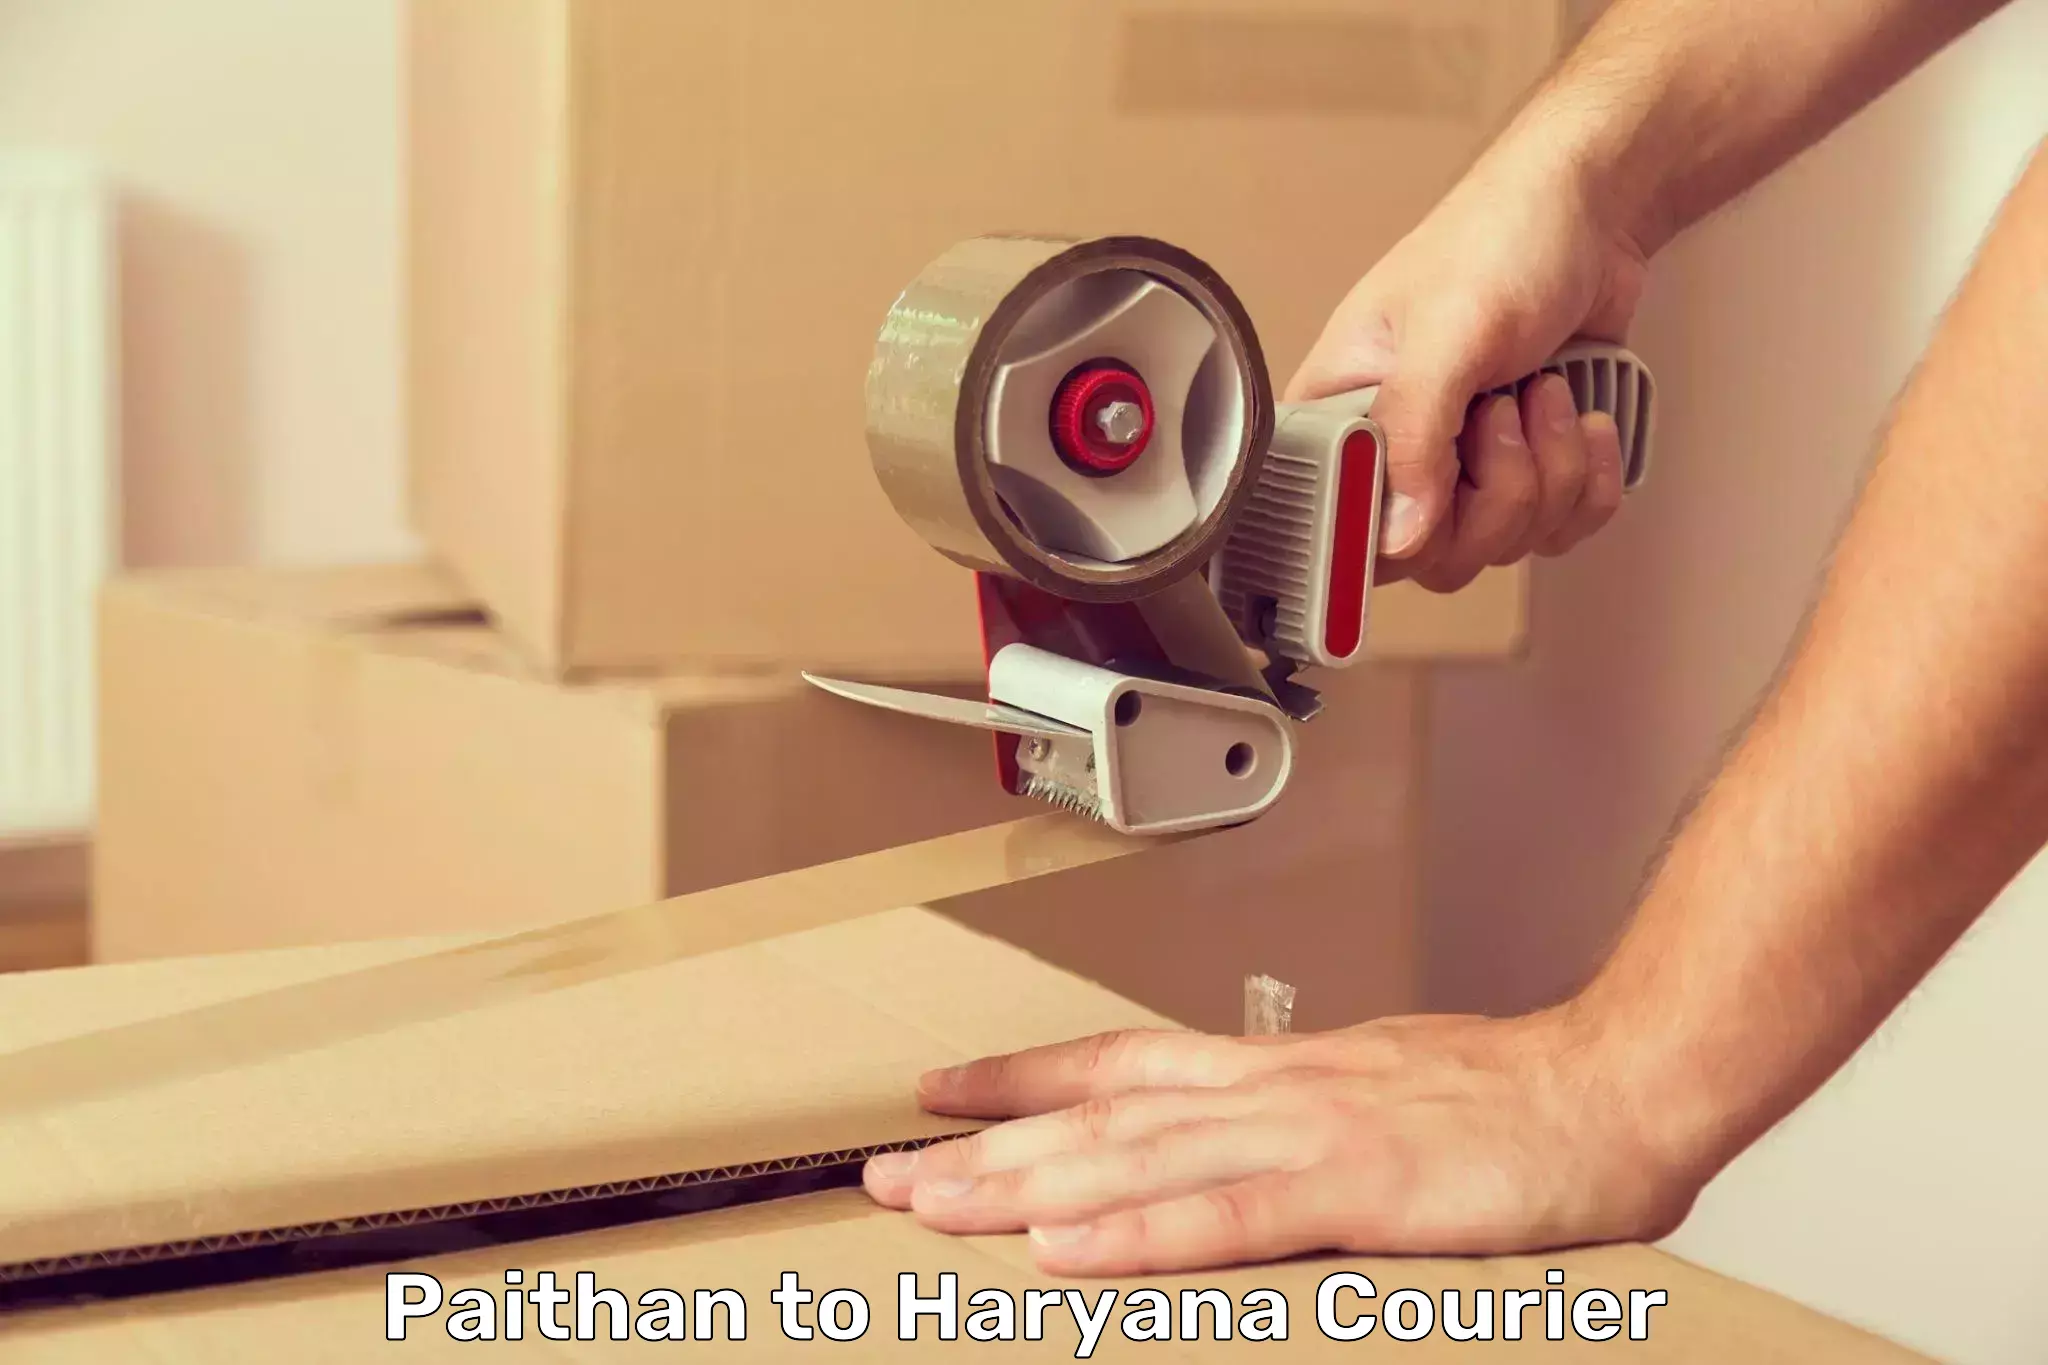 Customer-oriented courier services Paithan to NCR Haryana